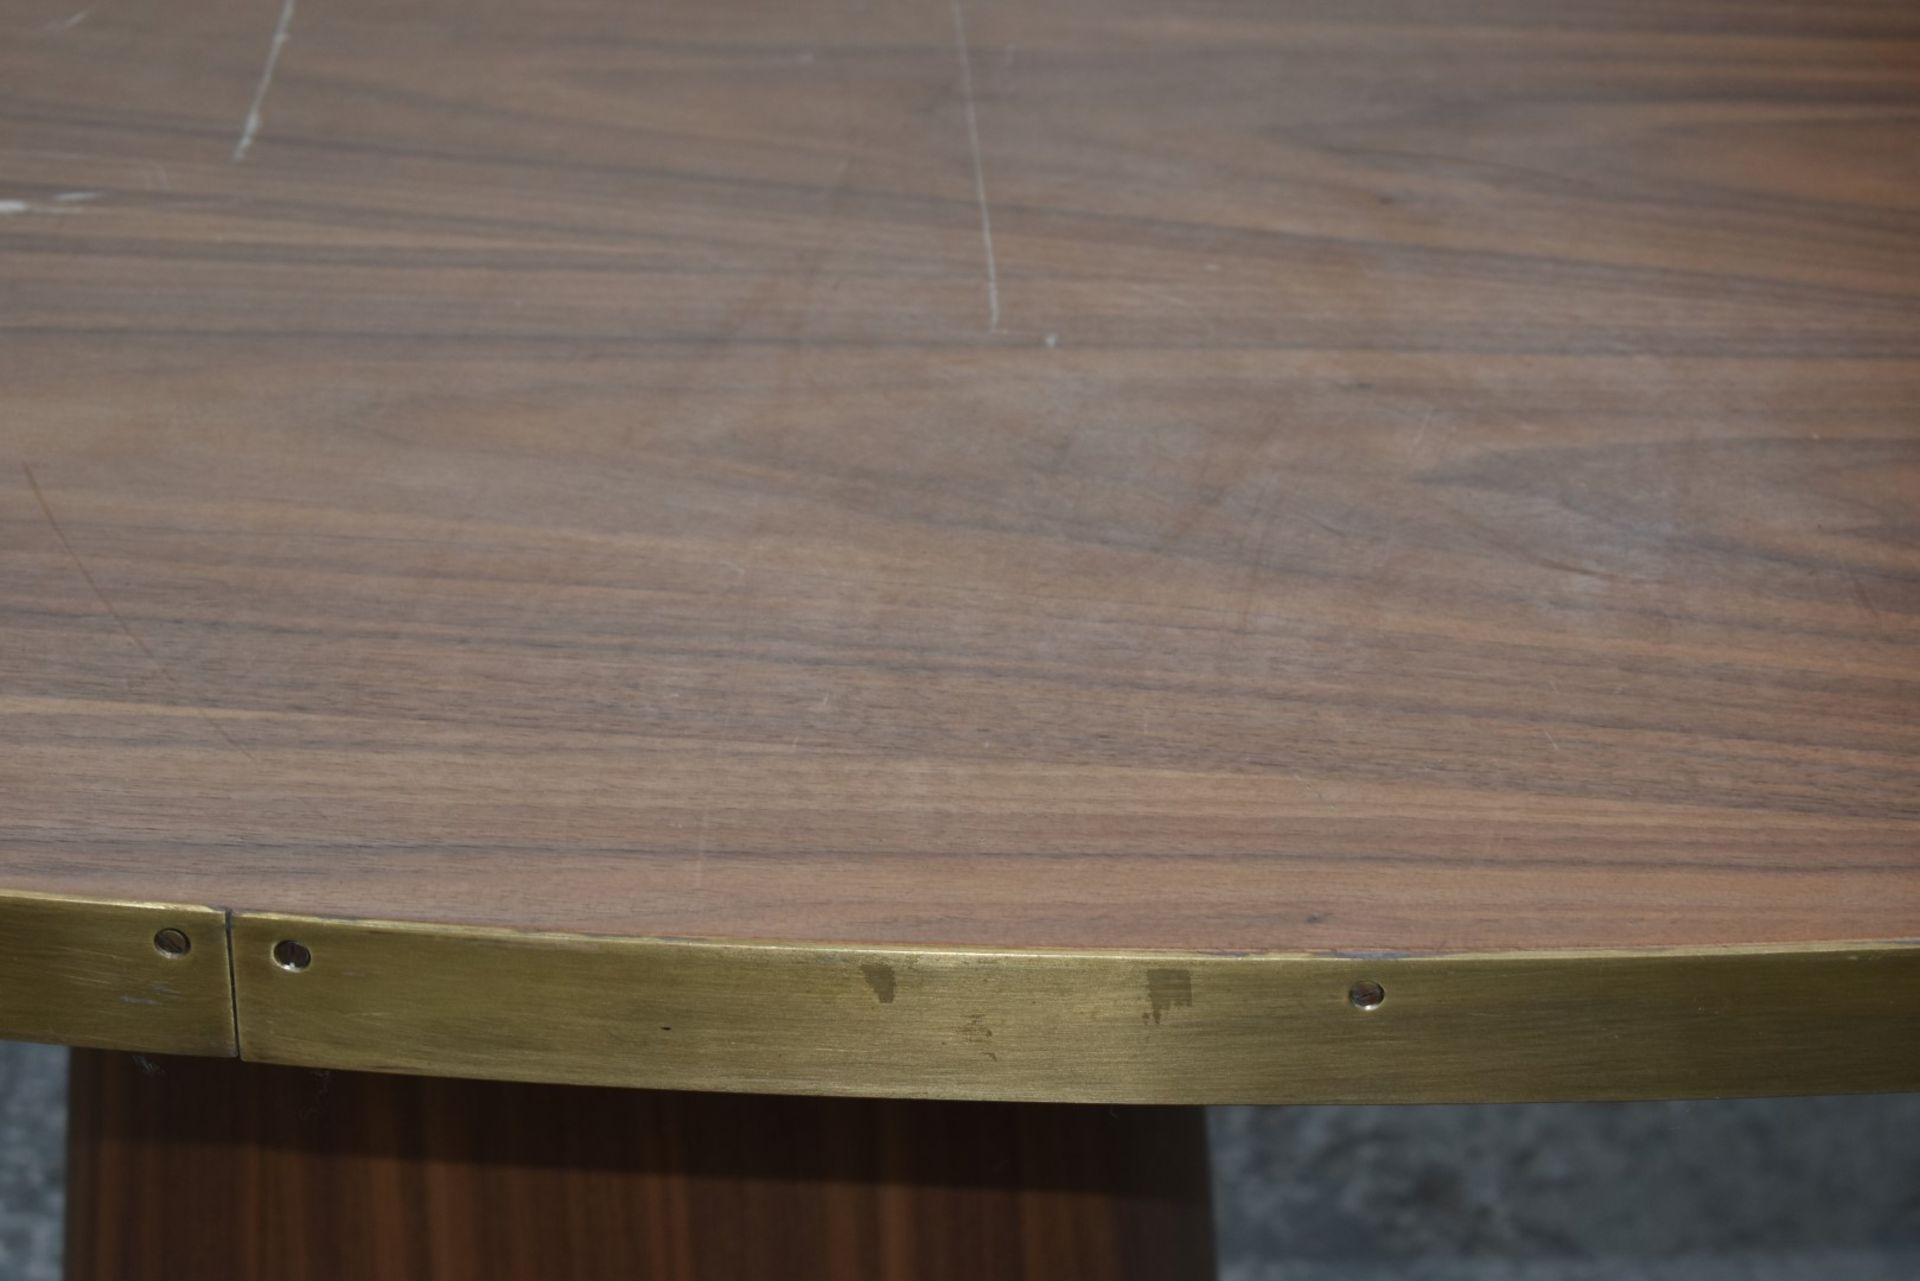 1 x Oval Banqueting Dining Table By AKP Design Athens - Walnut Top With Antique Brass Edging - Image 8 of 10